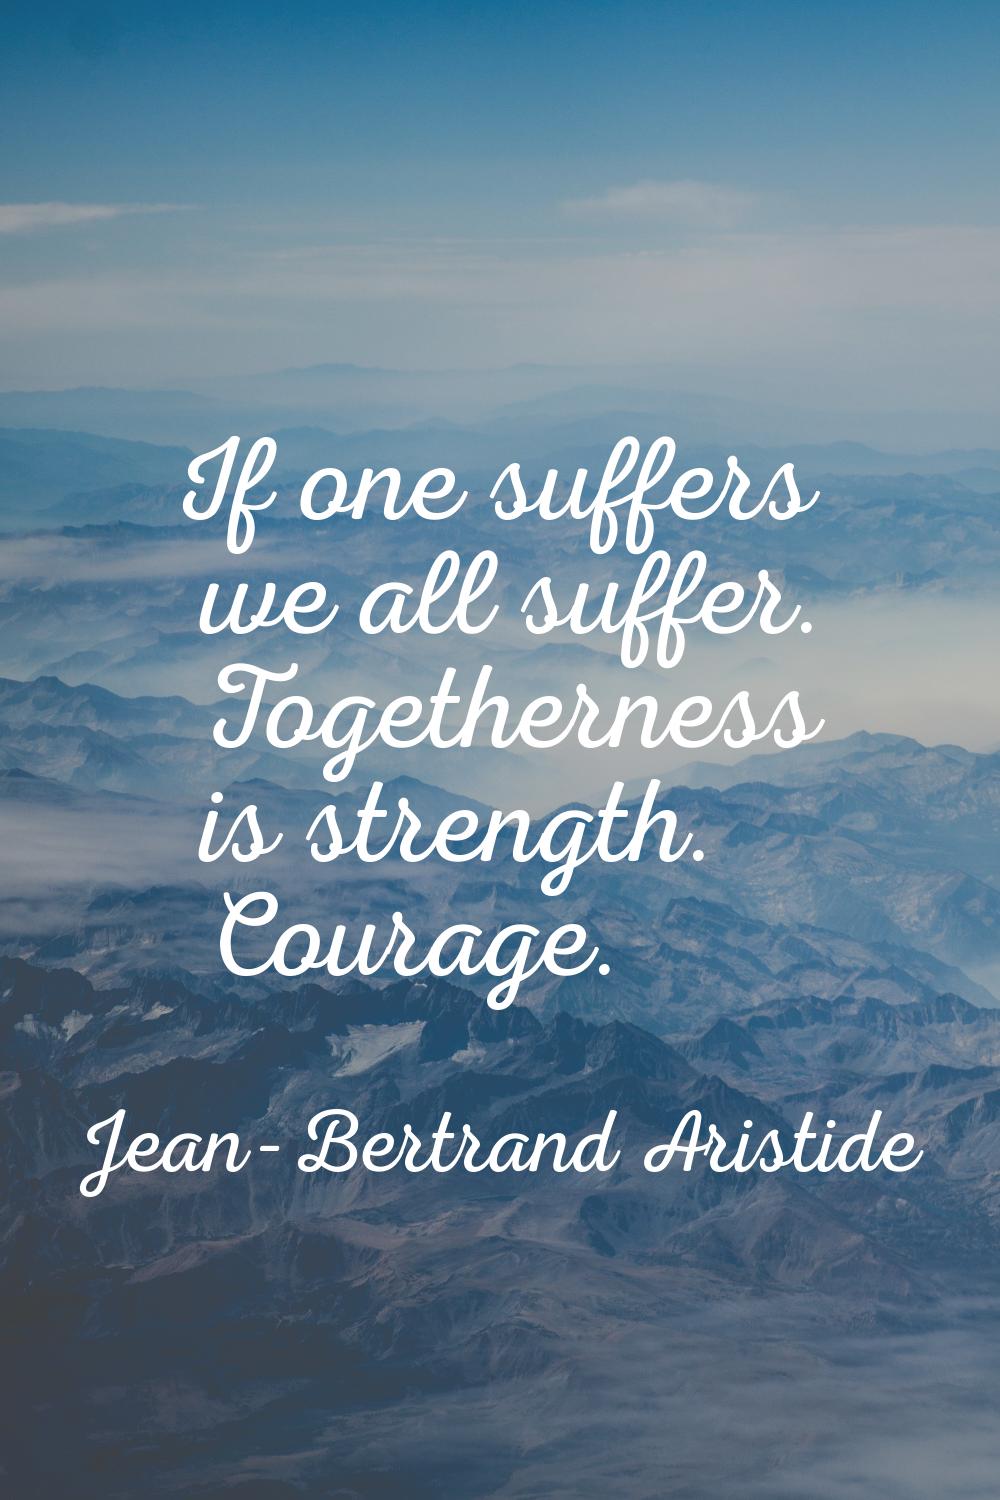 If one suffers we all suffer. Togetherness is strength. Courage.